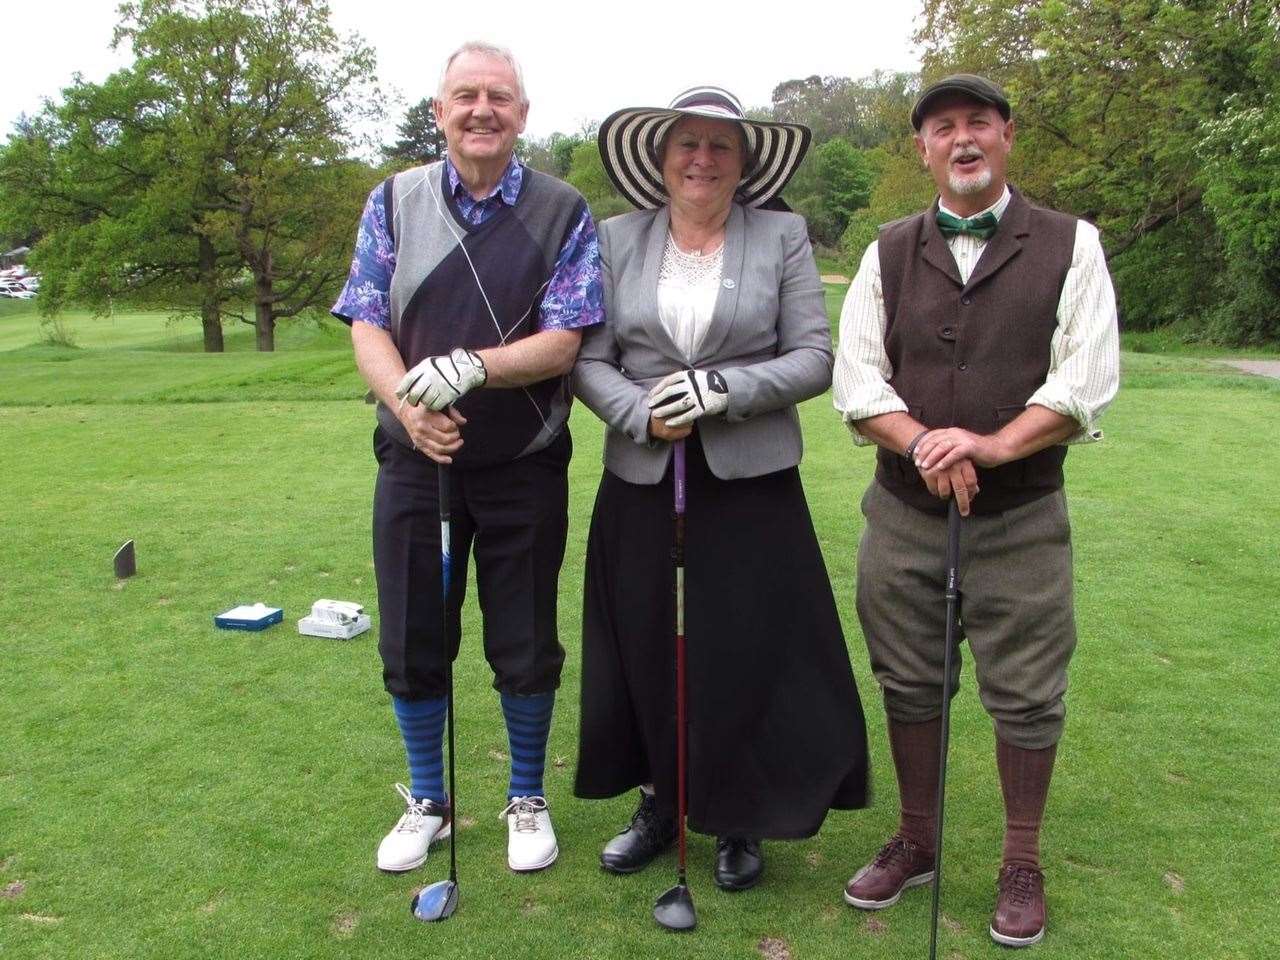 Bearsted Golf Club celebrate 125 years in traditional attire